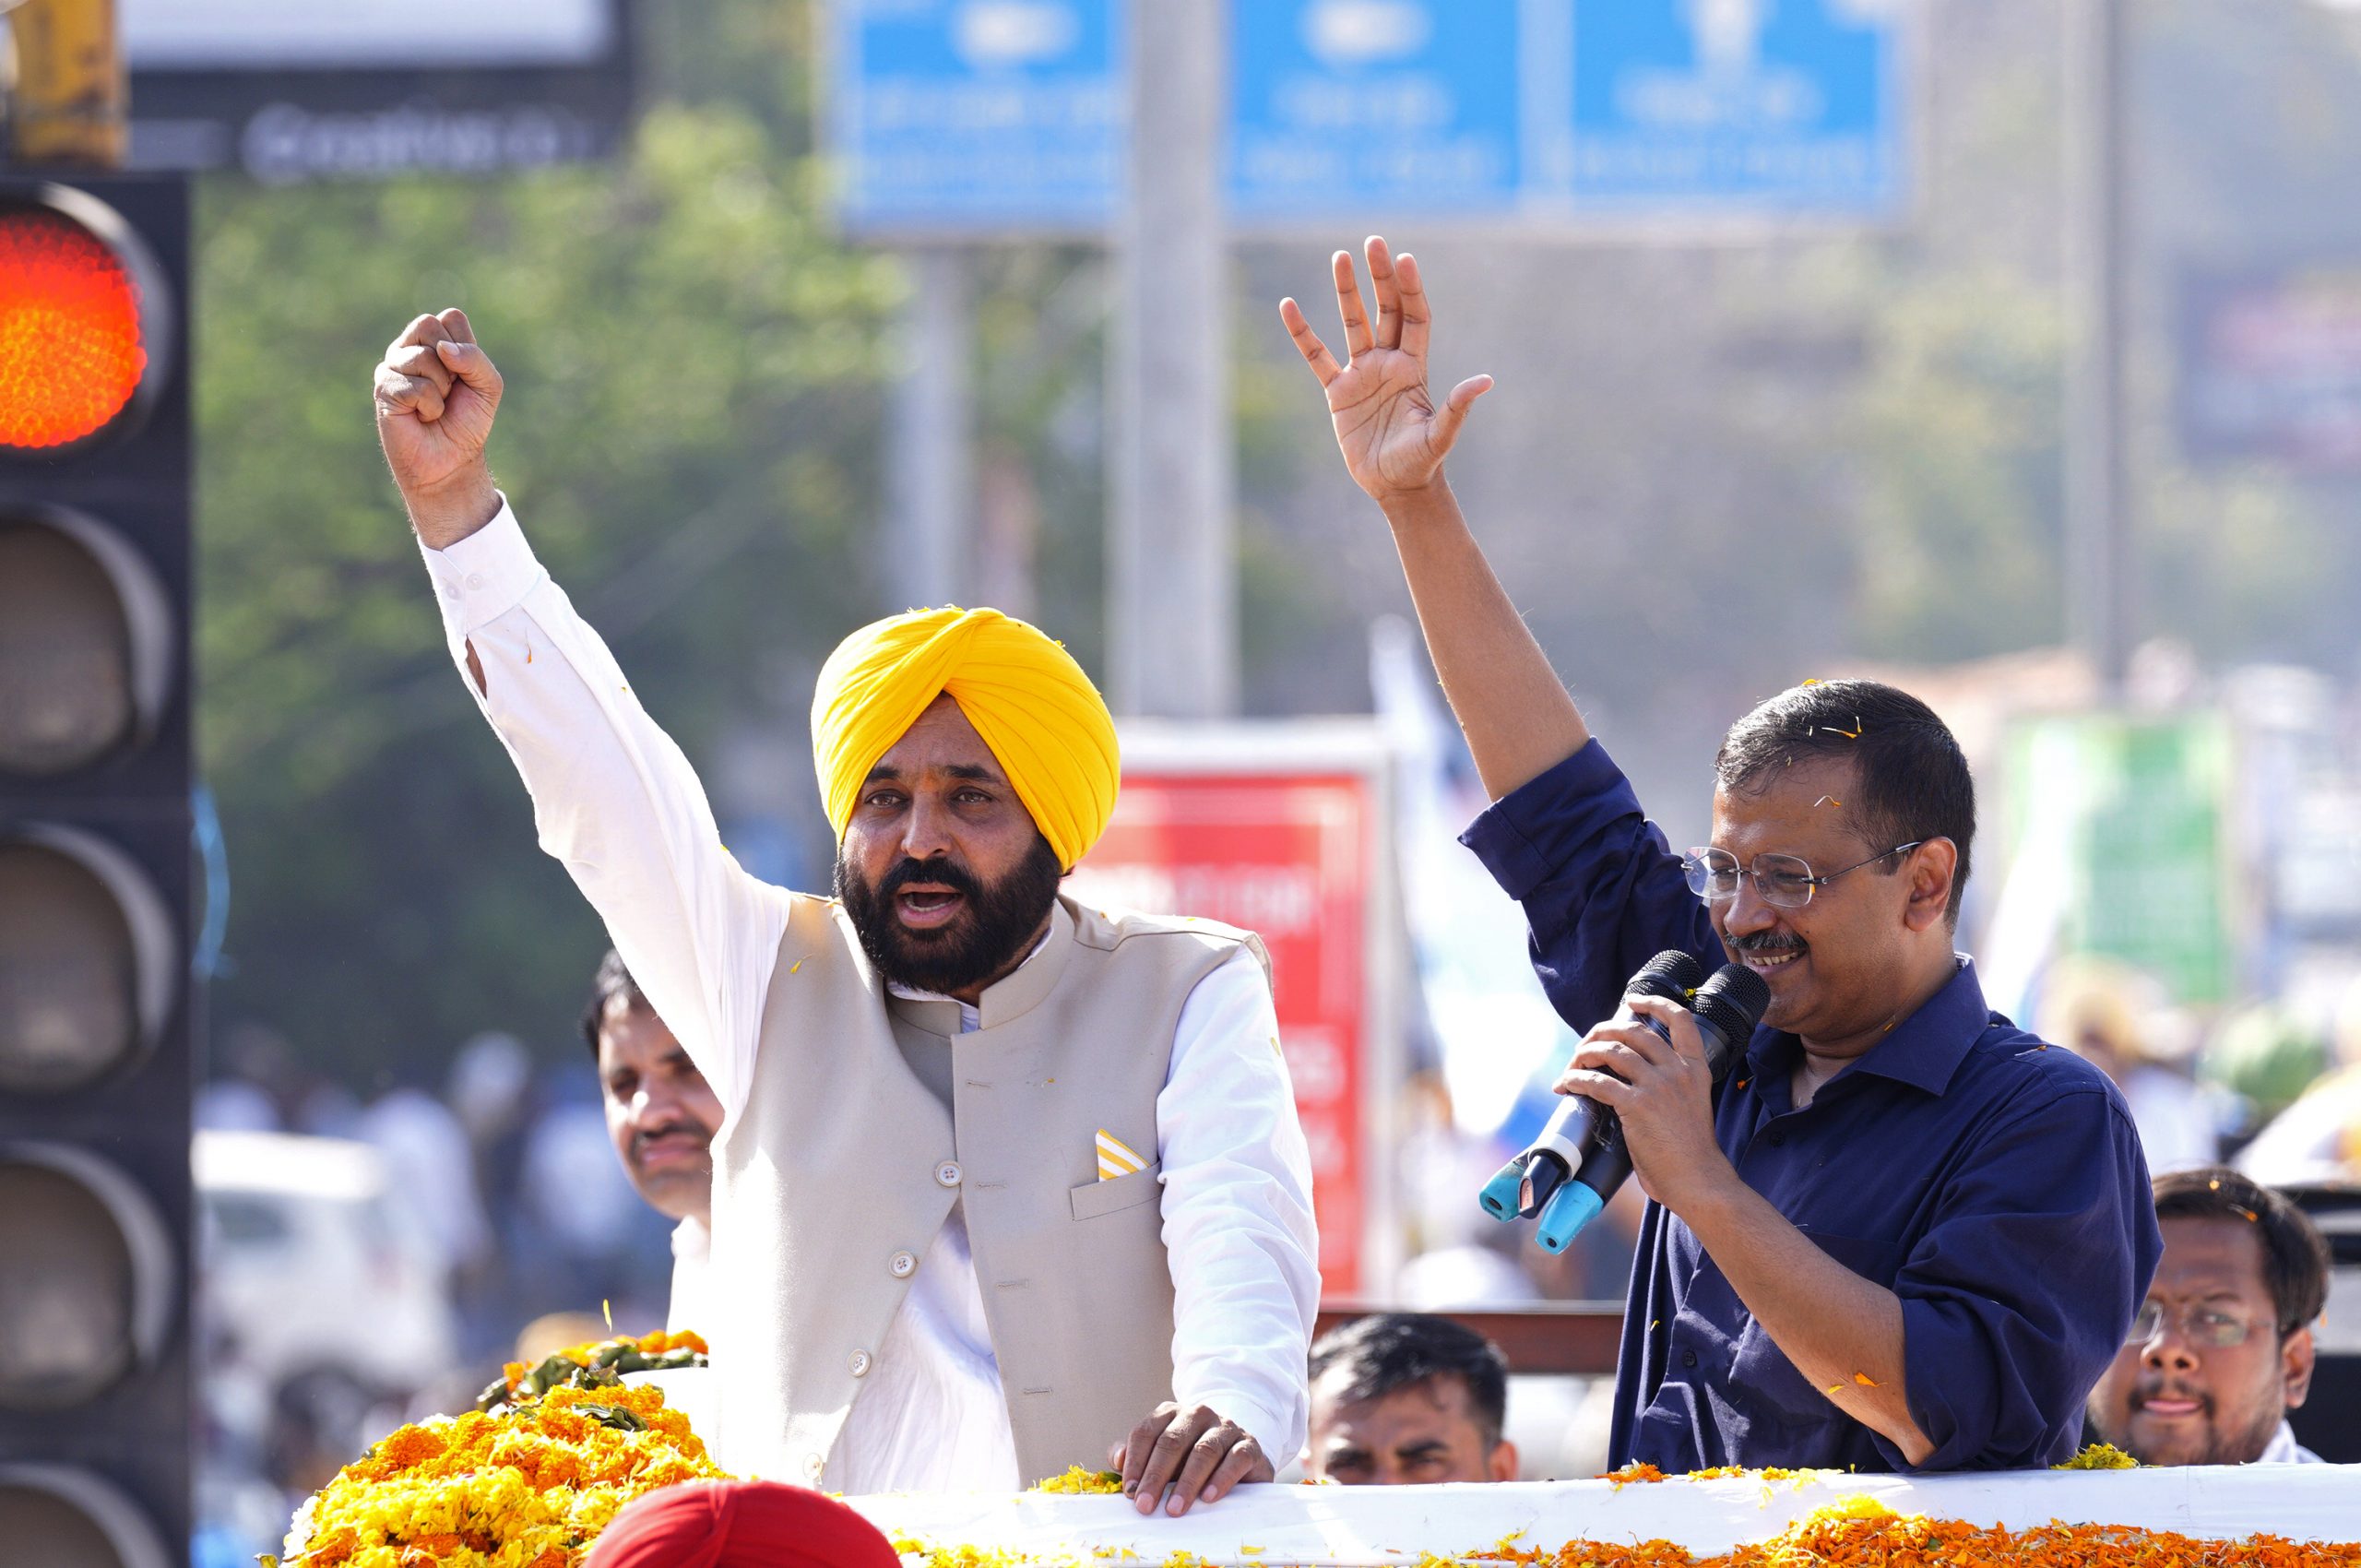 Arvind Kejriwal, Bhagwant Mann reach Raipur to campaign for AAP ahead of Assembly elections